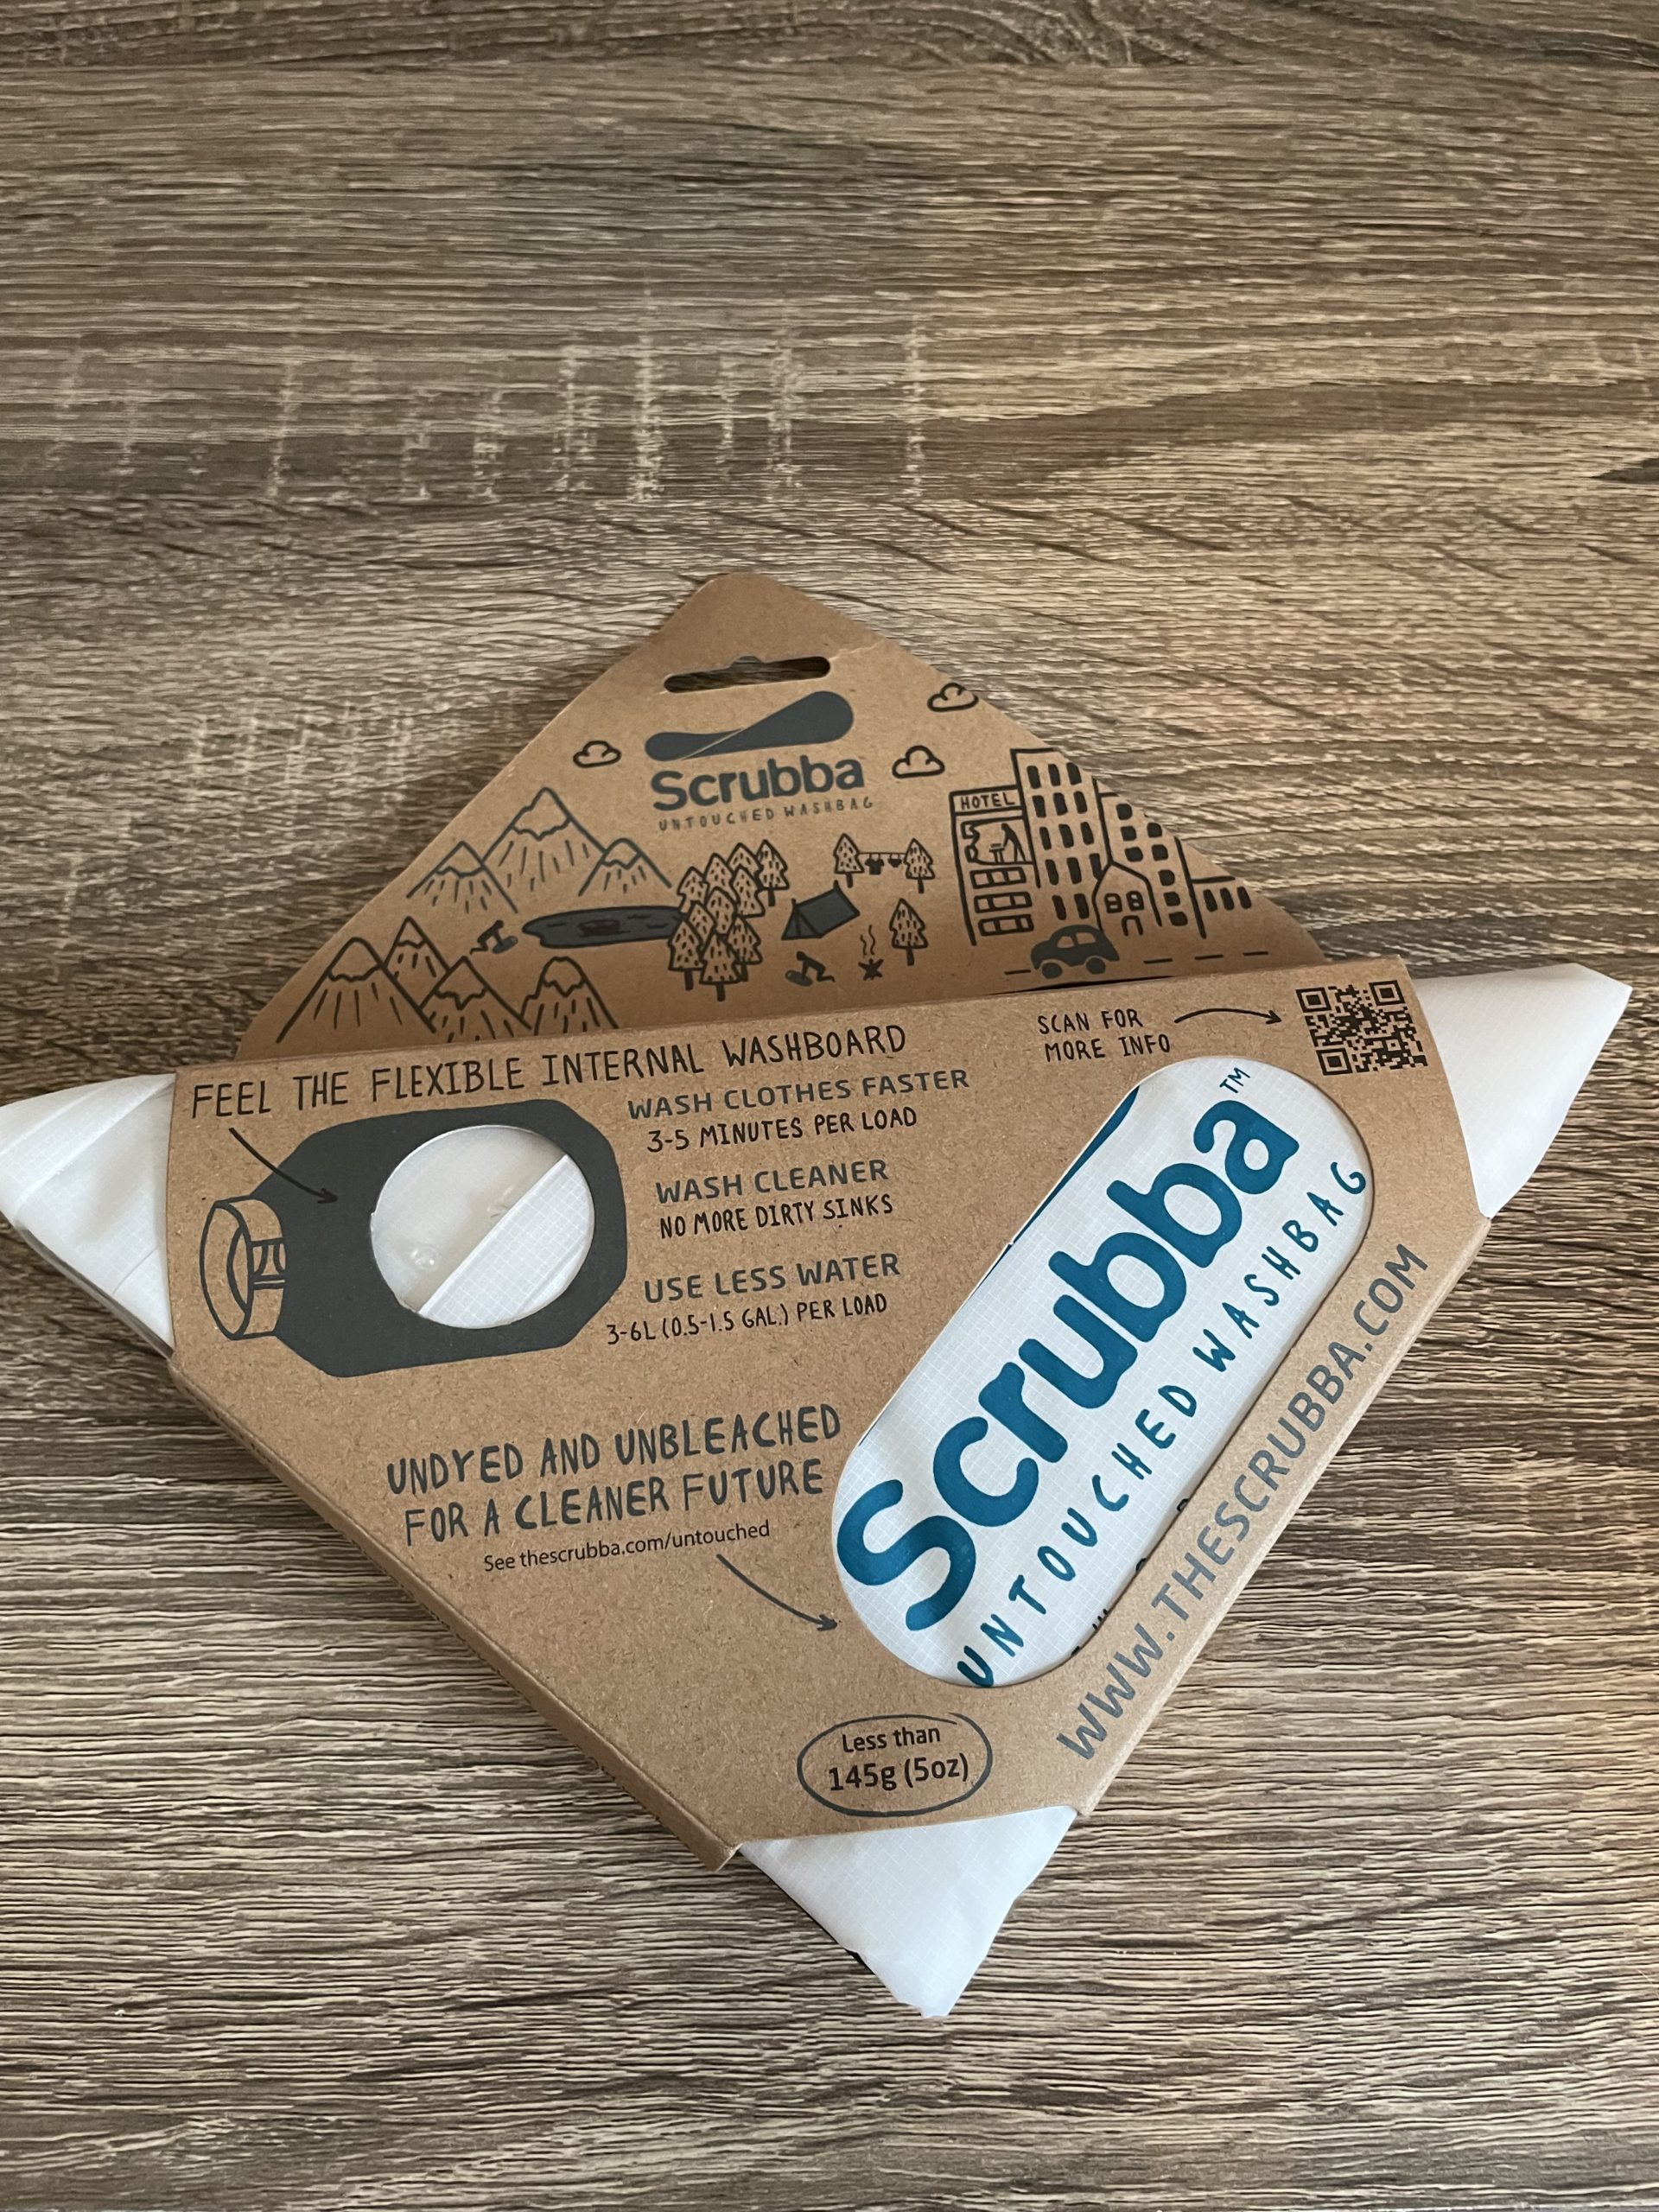 Scrubba Wash Bag Review - This Kind Planet